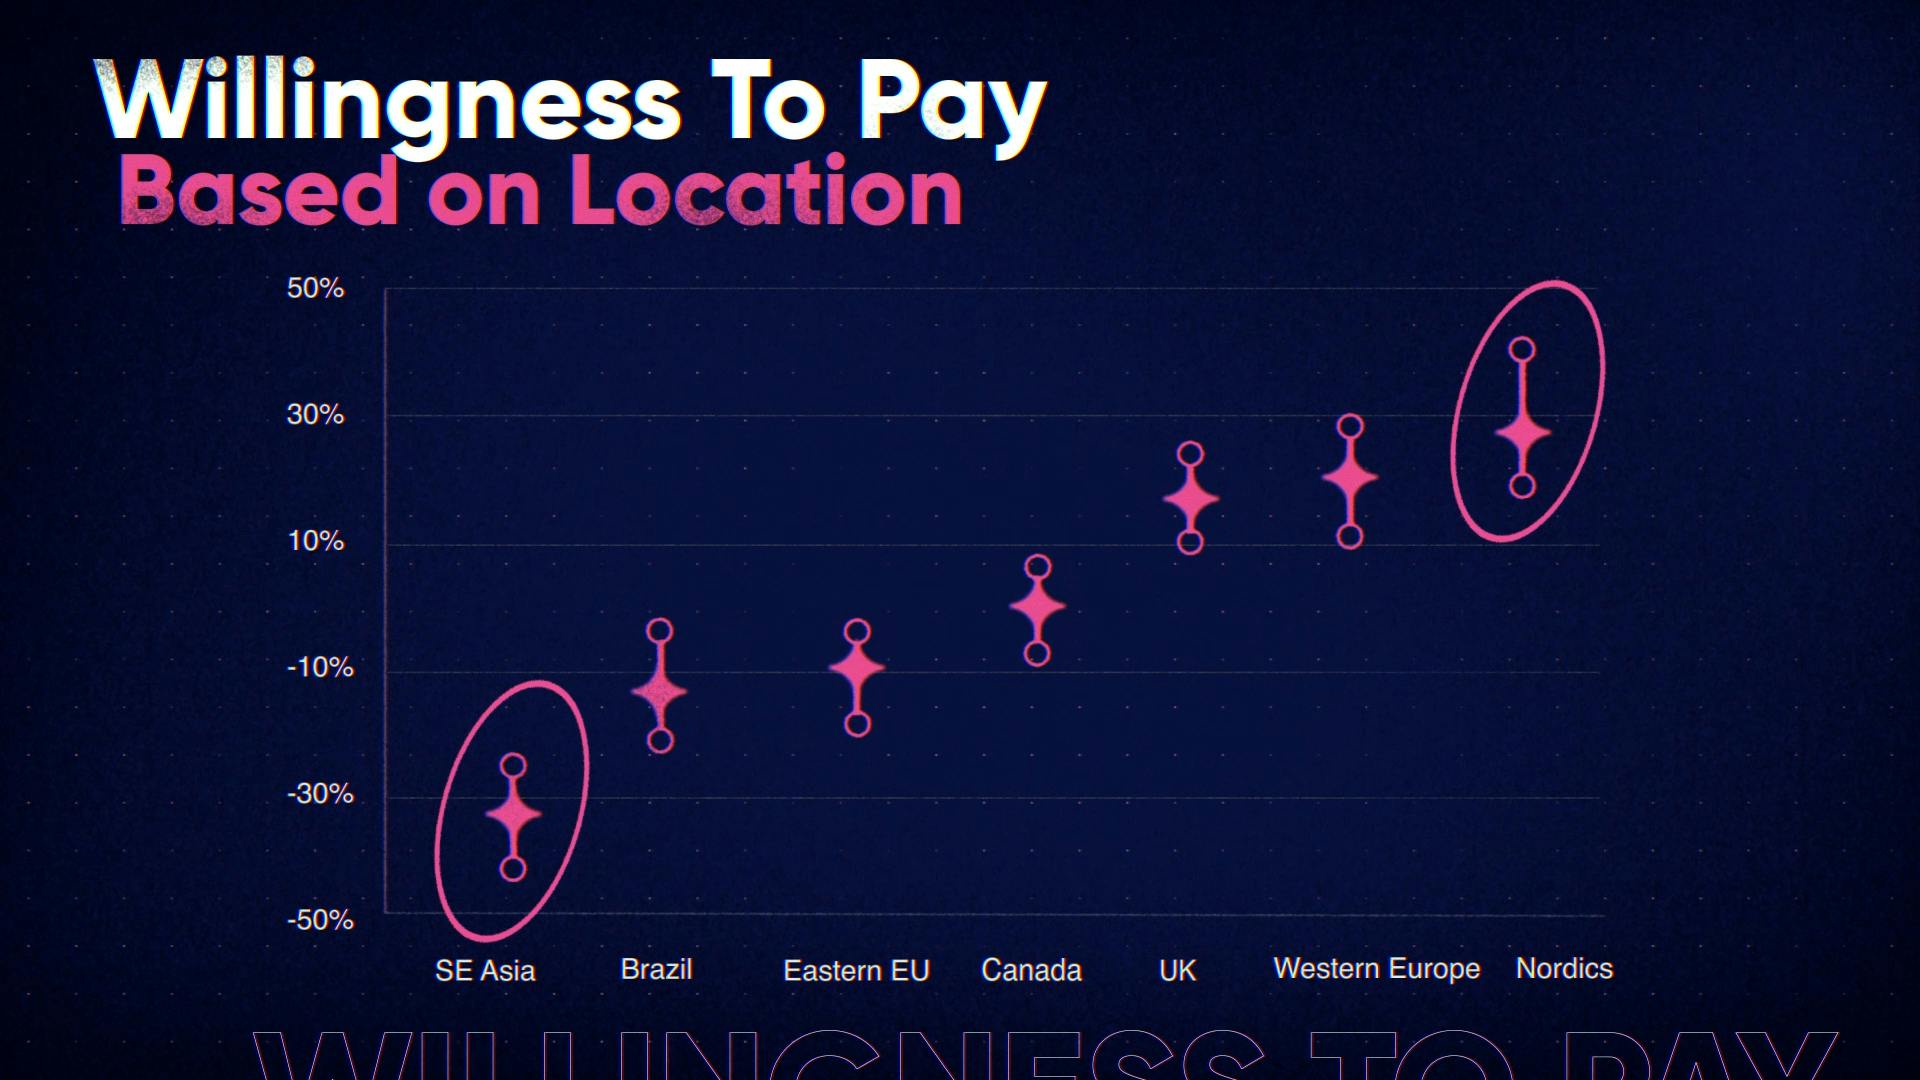 Willingness to Pay based on Location